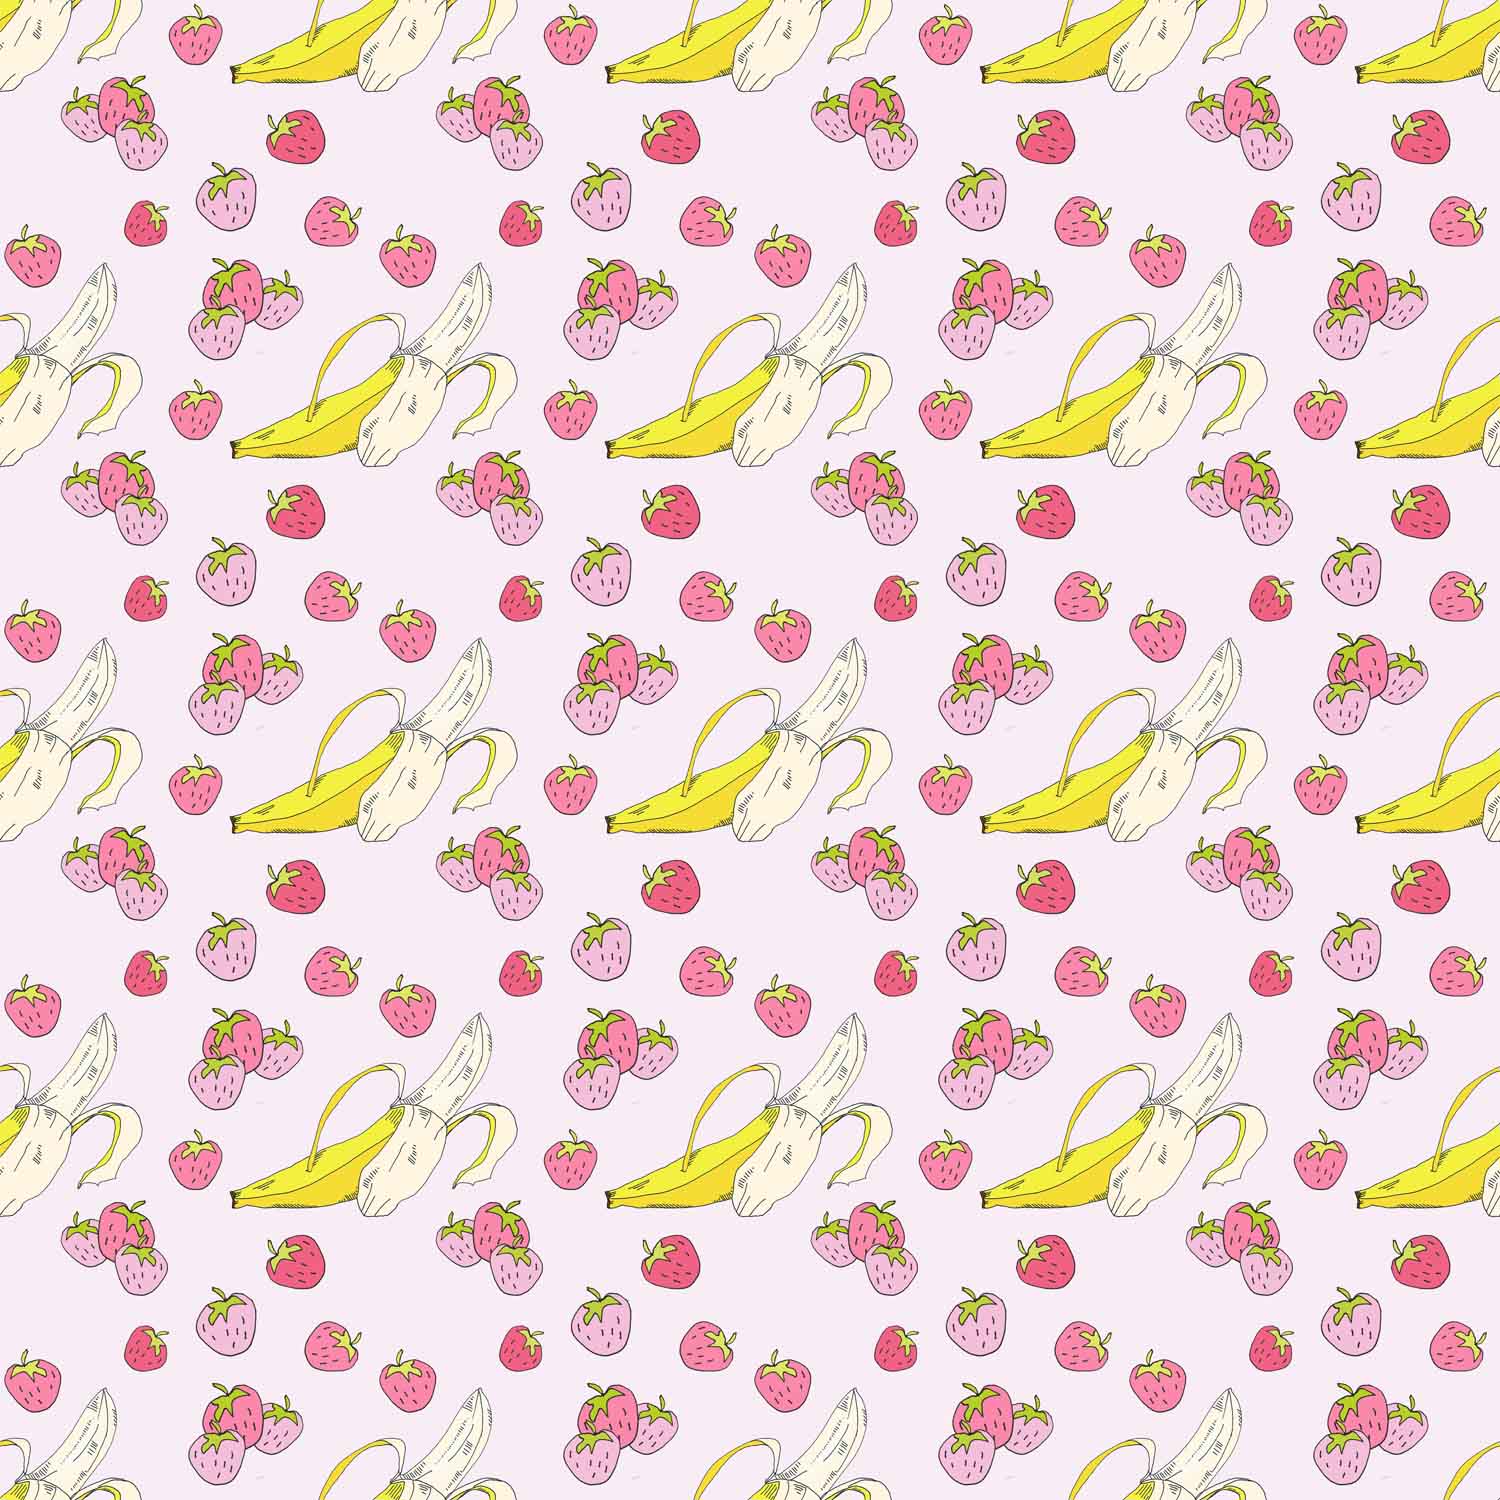 art every day number 519 / pattern illustration / bananas & berries